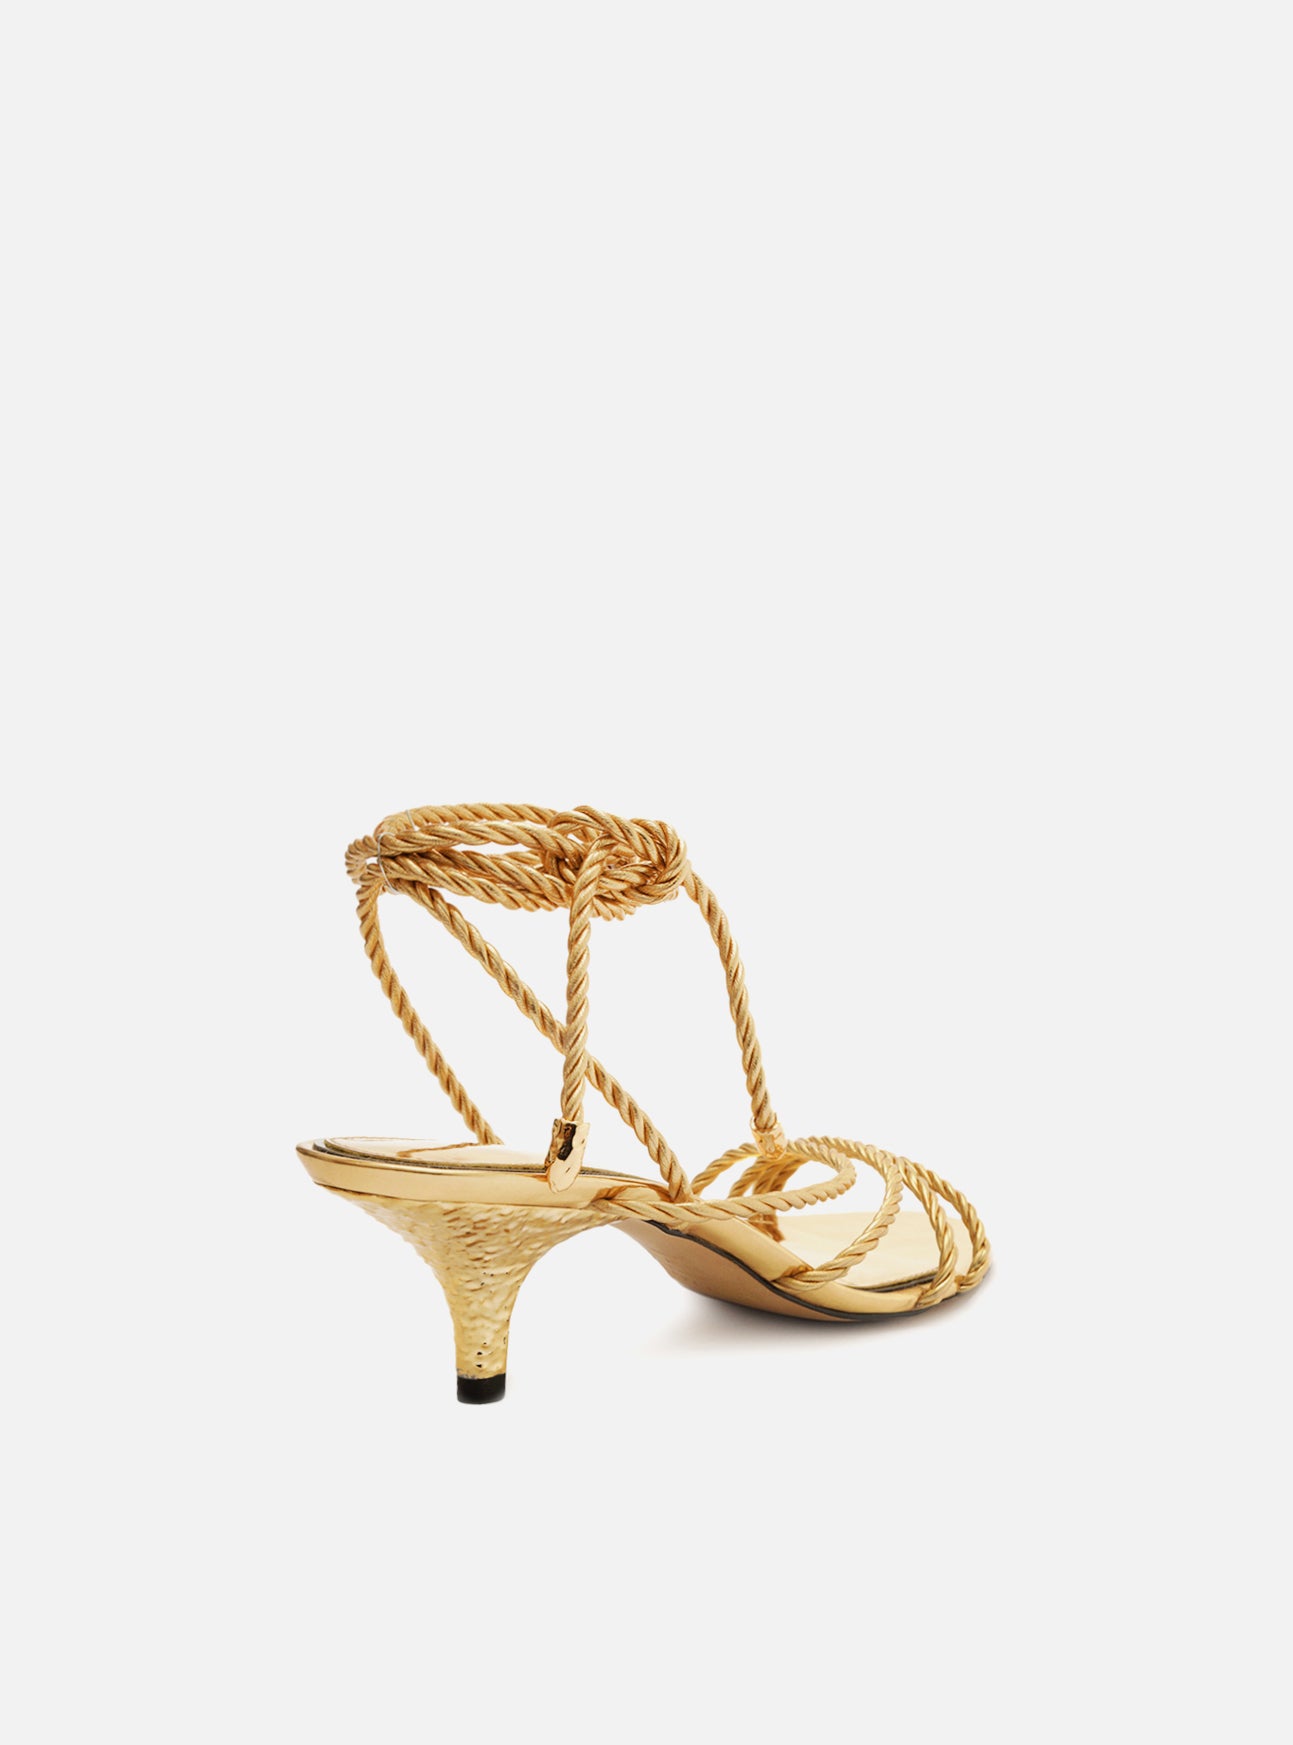 The Campaign Gold Strappy Sandal